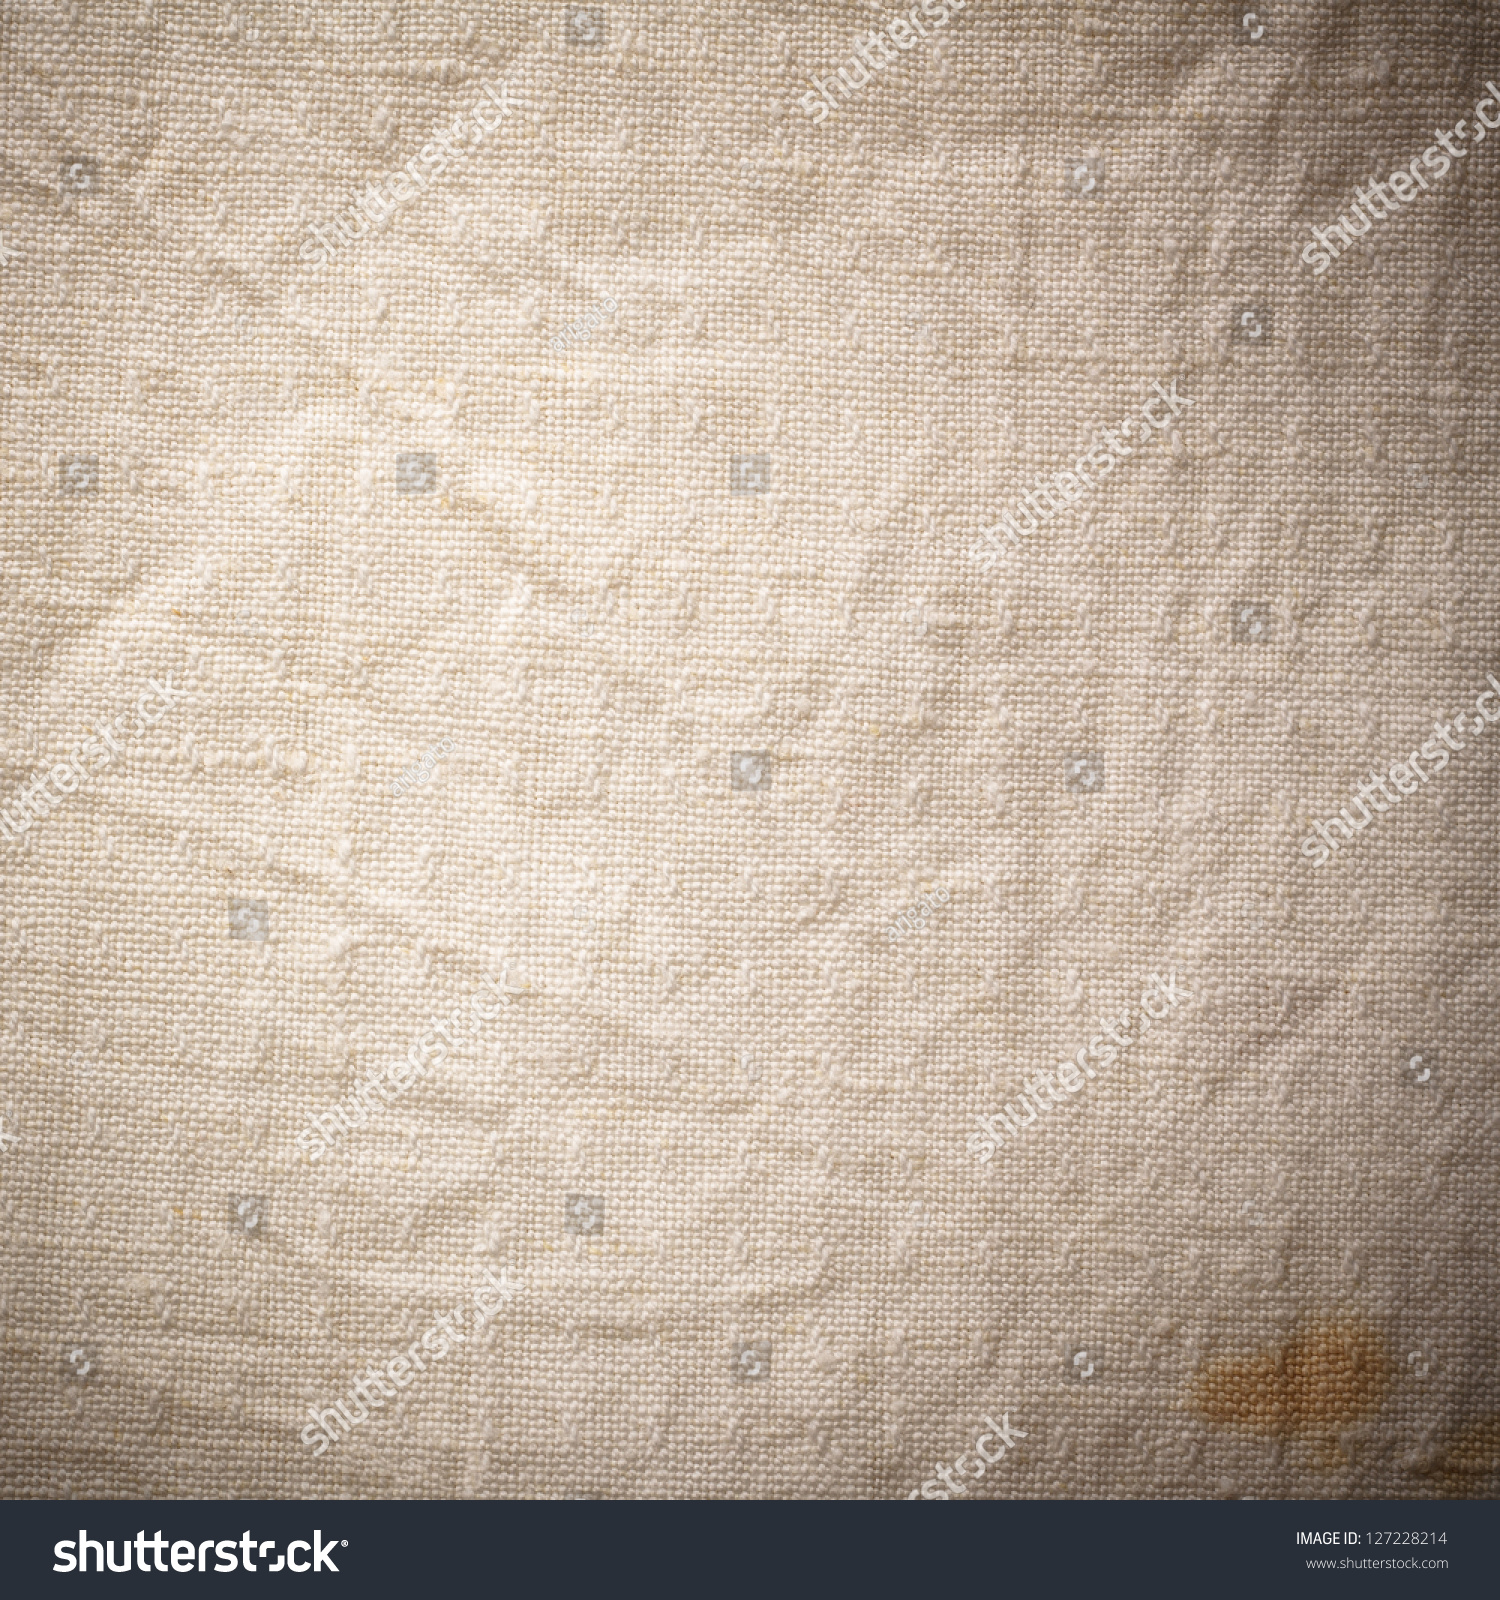 Dirty fabric texture photo